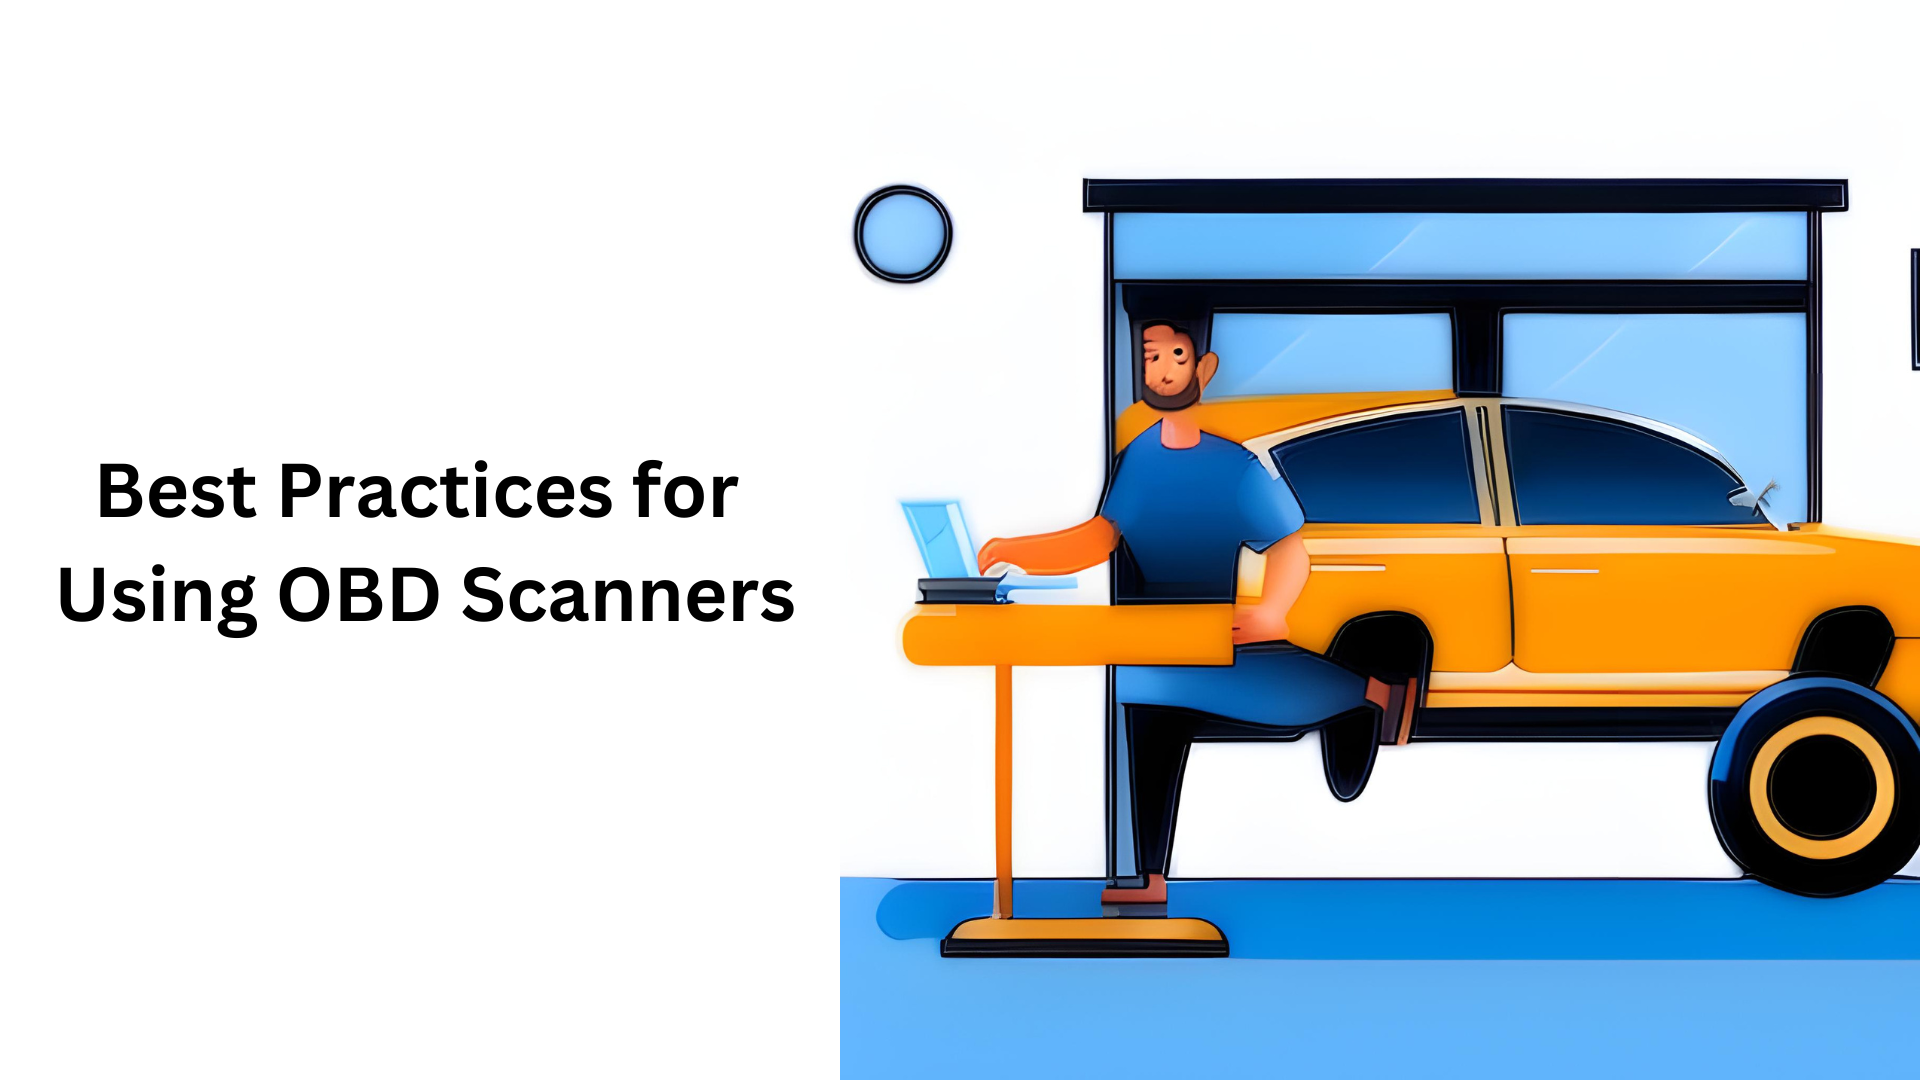 Best Practices for Using OBD Scanners